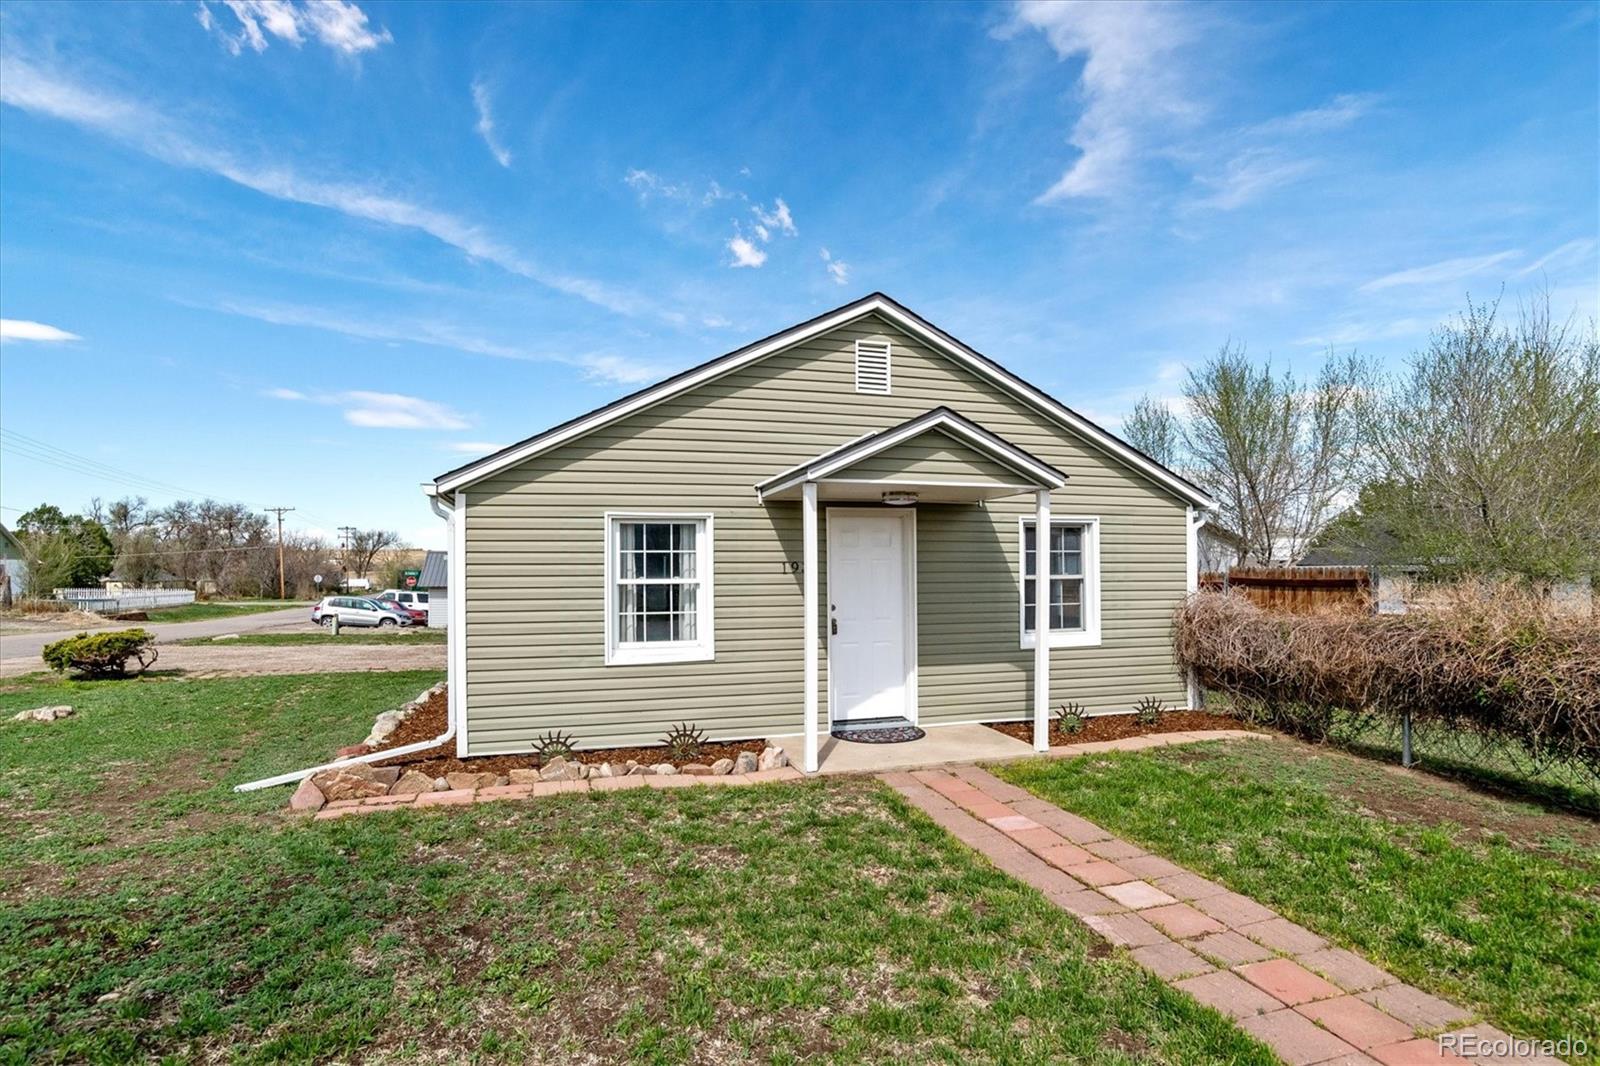 CMA Image for 193 s mcdonnell street,Byers, Colorado